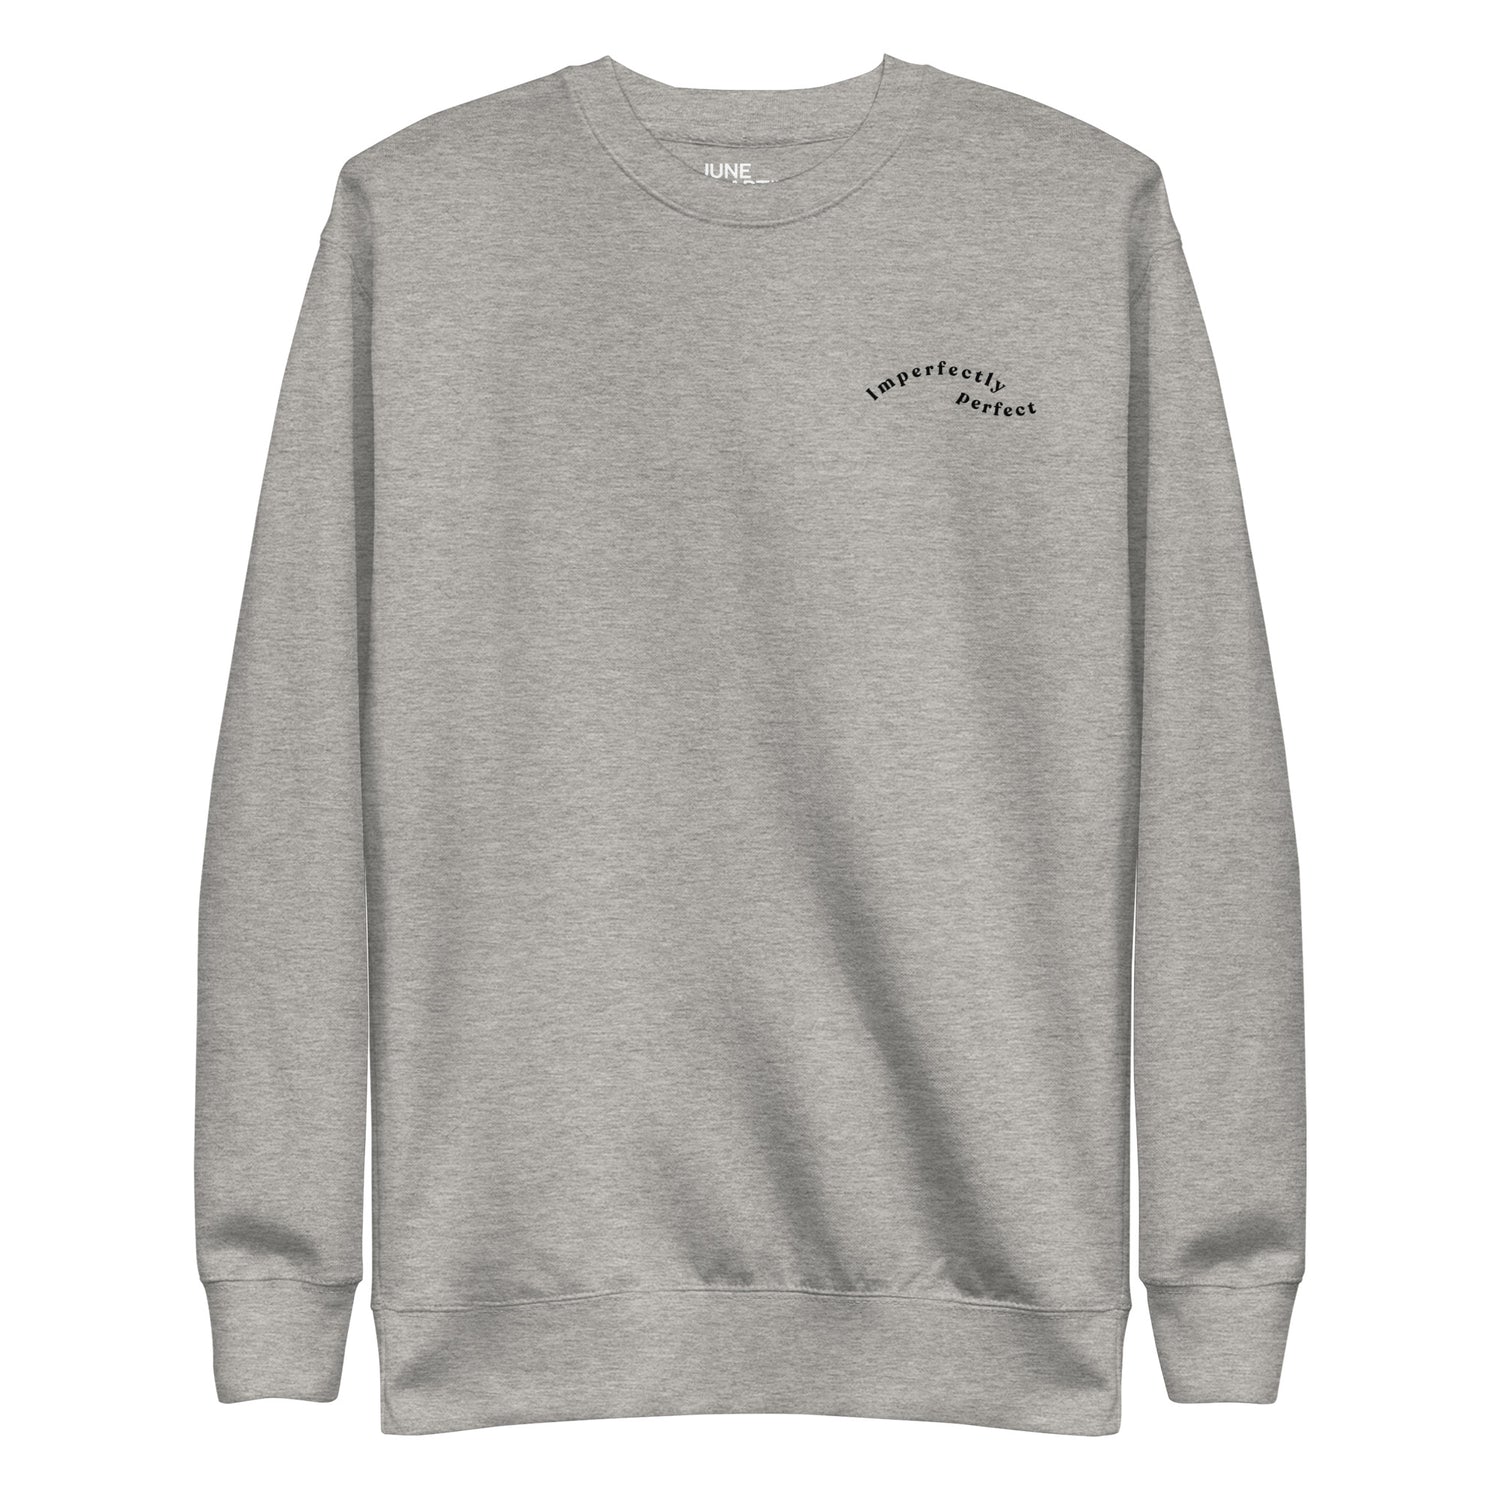 Grey crew neck sweatshirt supporting the " Imperfectly perfect " style!